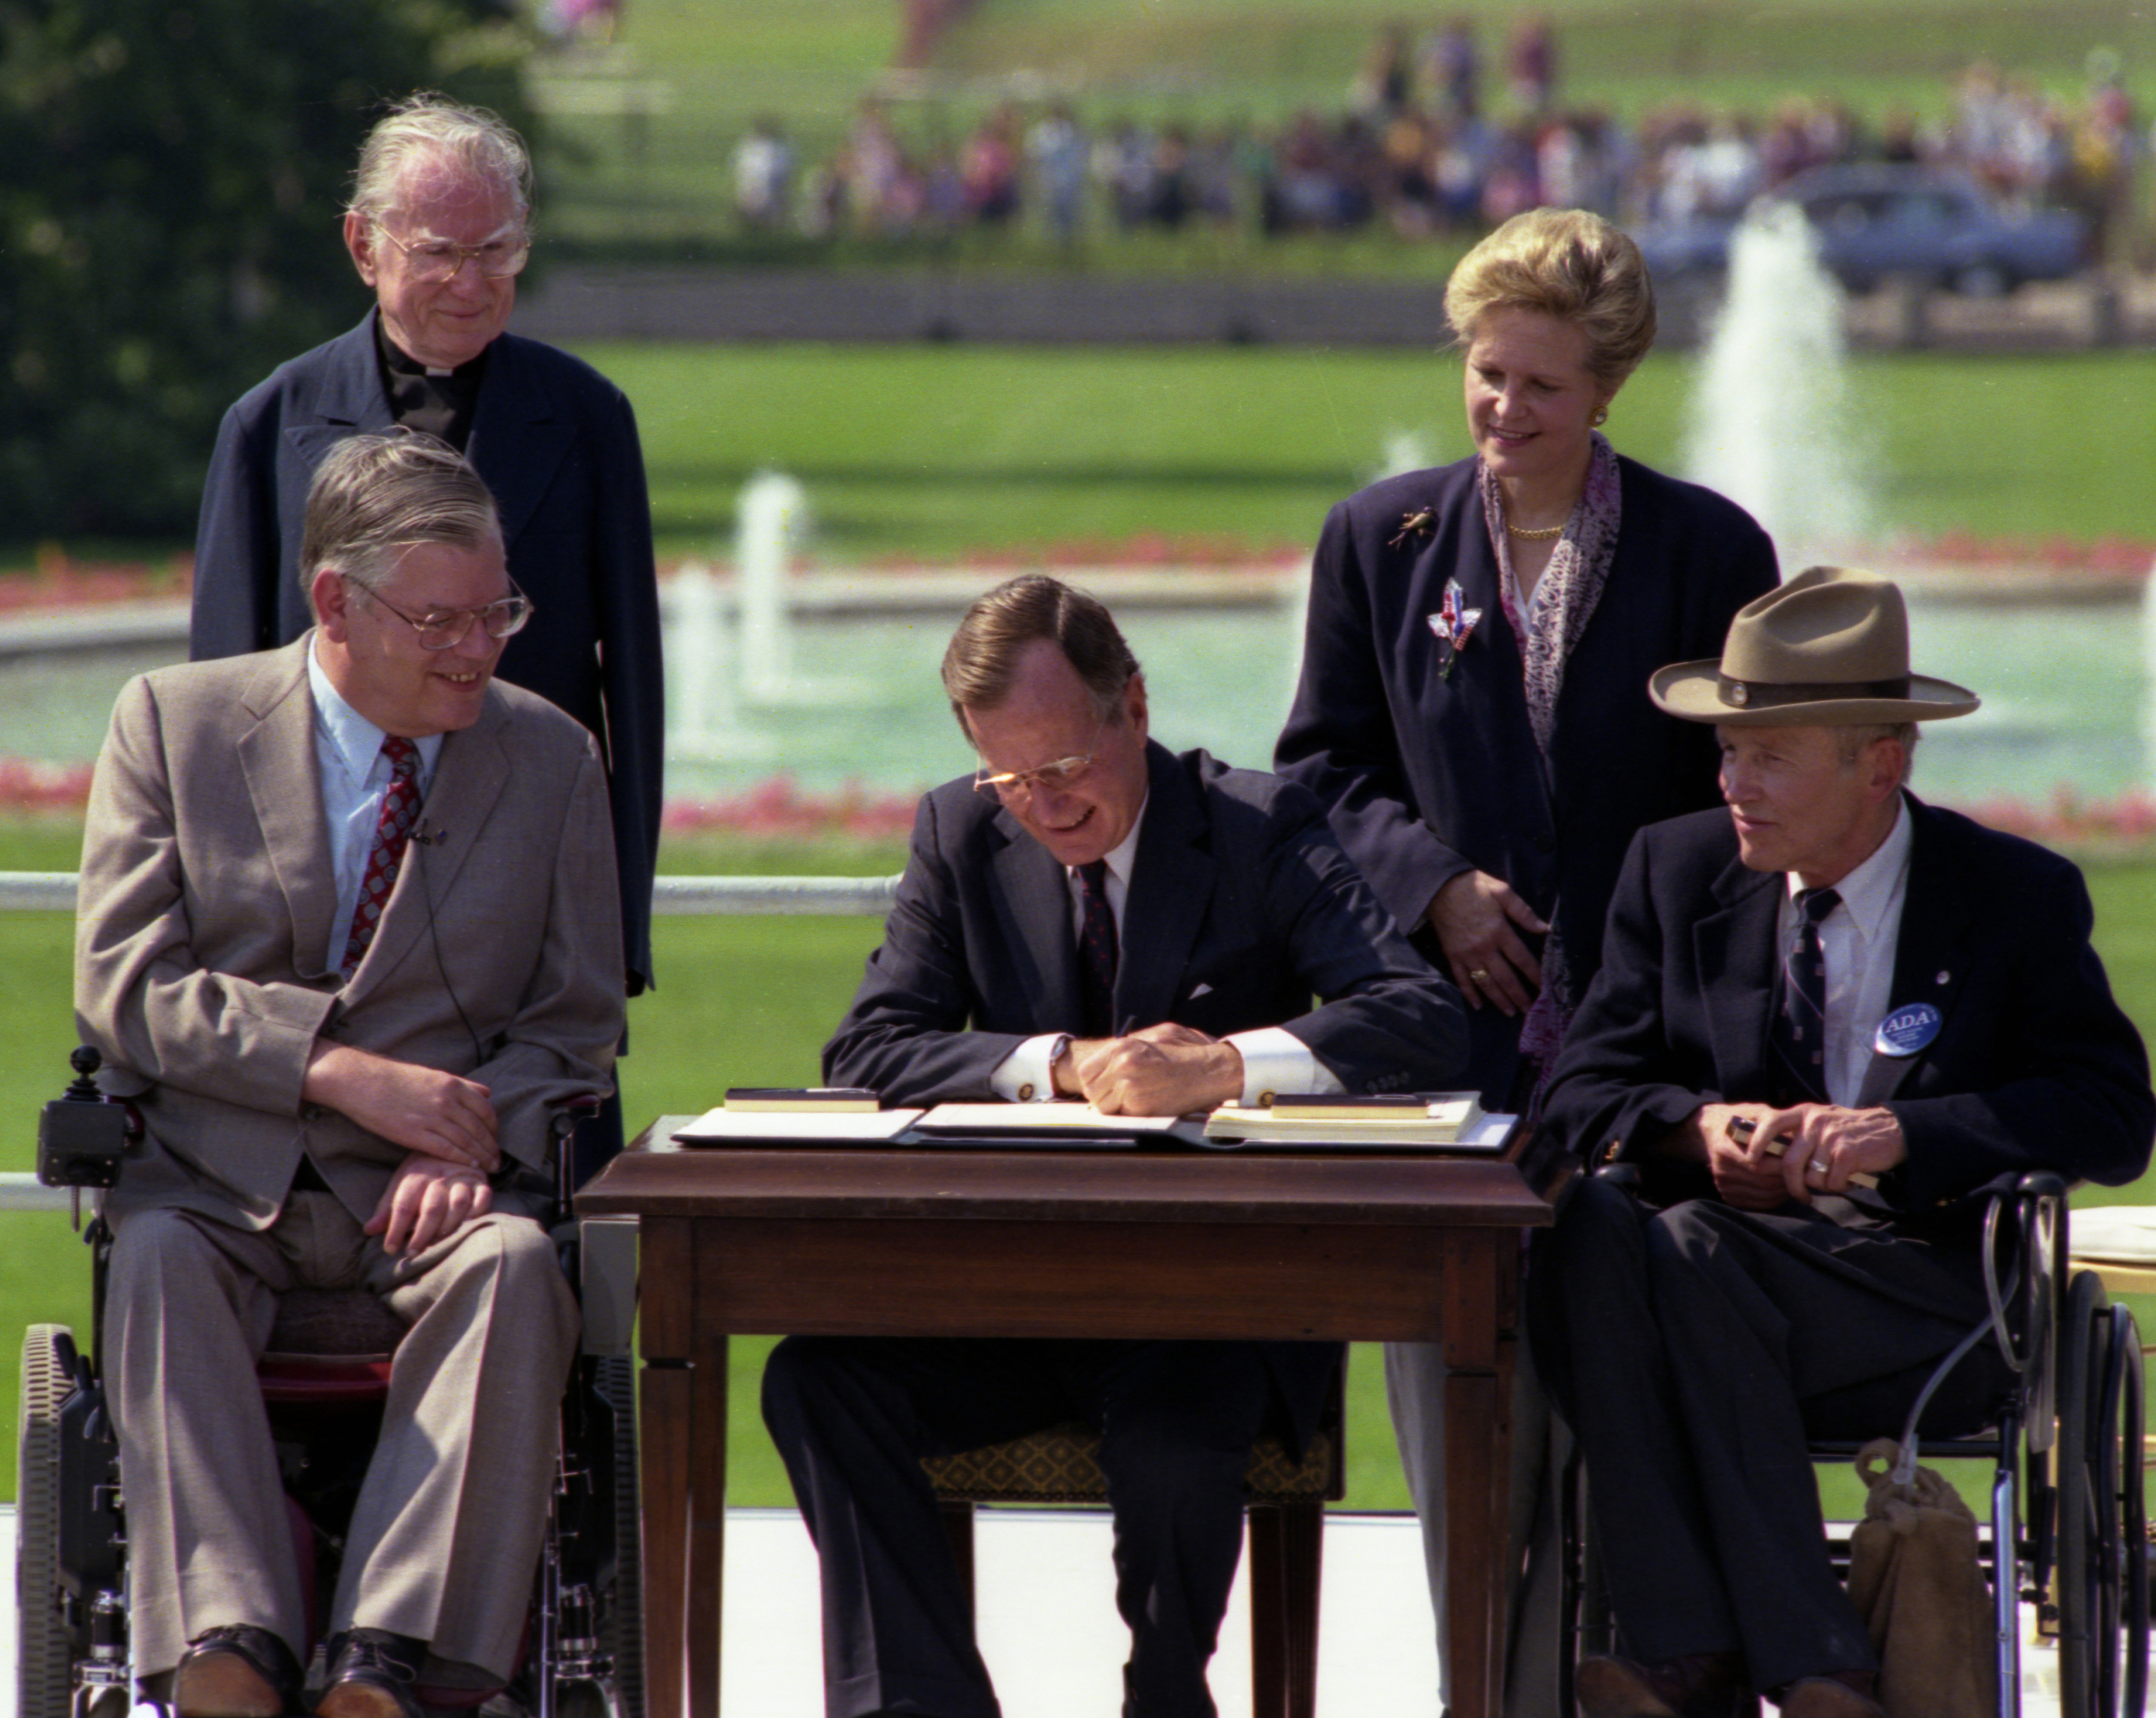 2 people in wheelchairs and 2 standing people look on as a man signs a document.